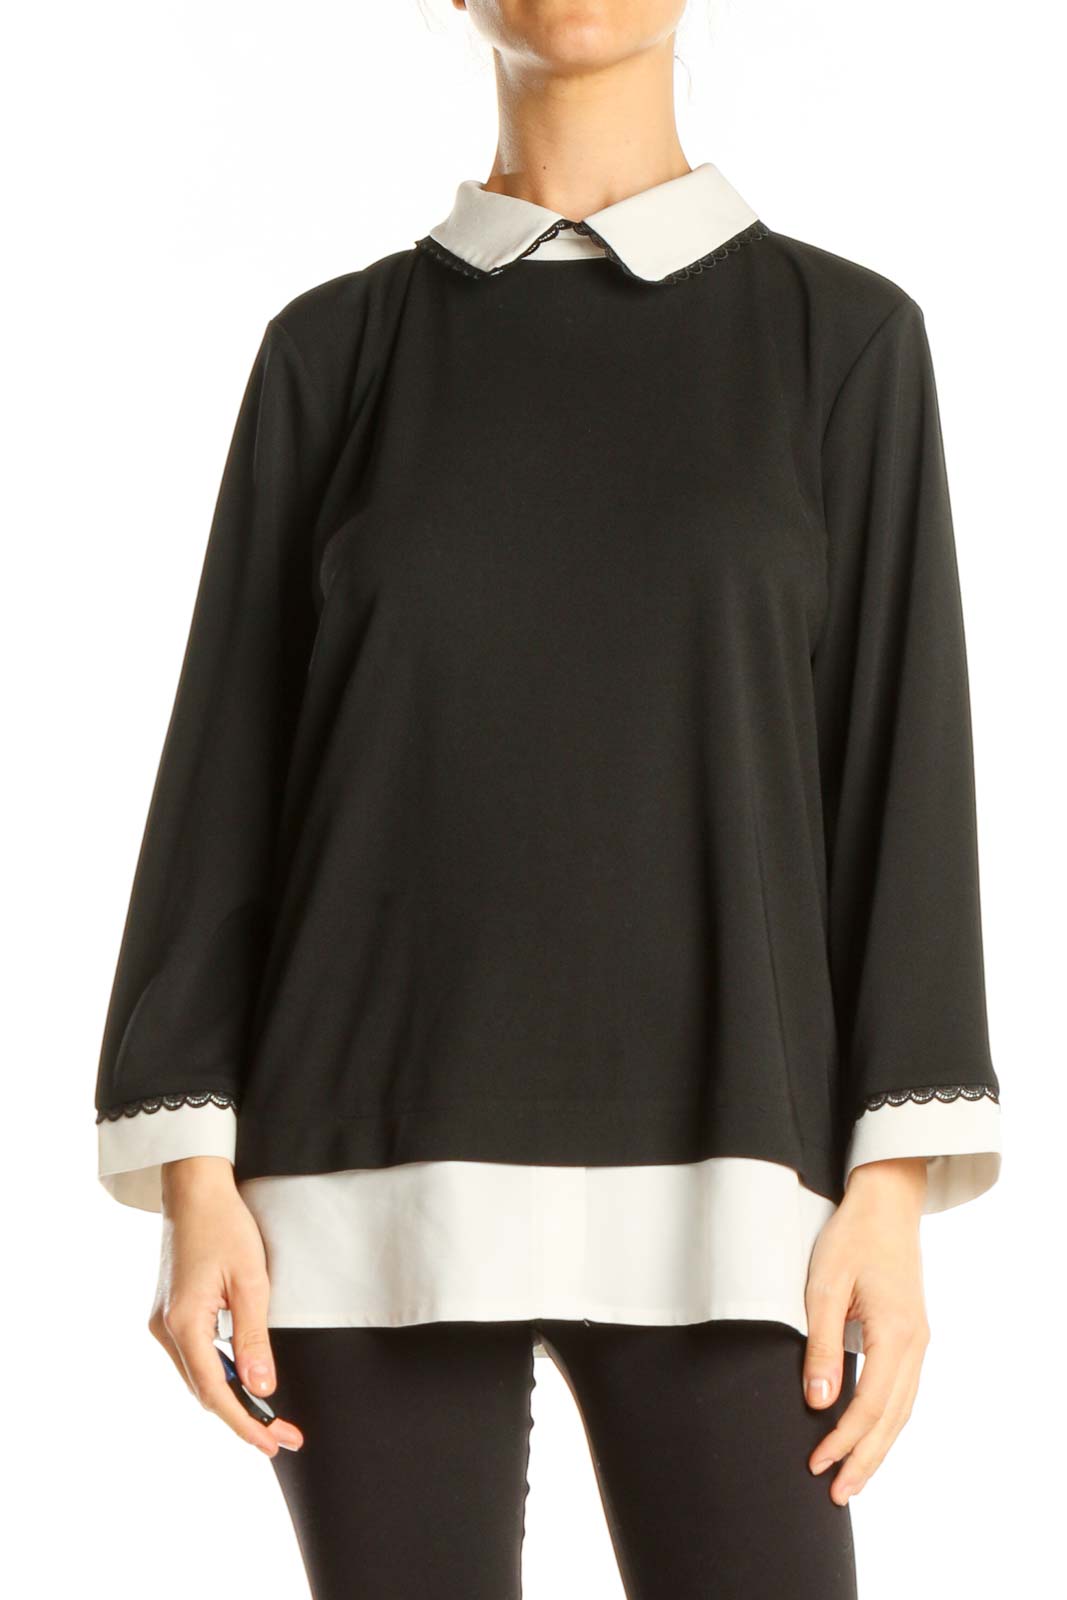 Black White Collared Classic Top Front